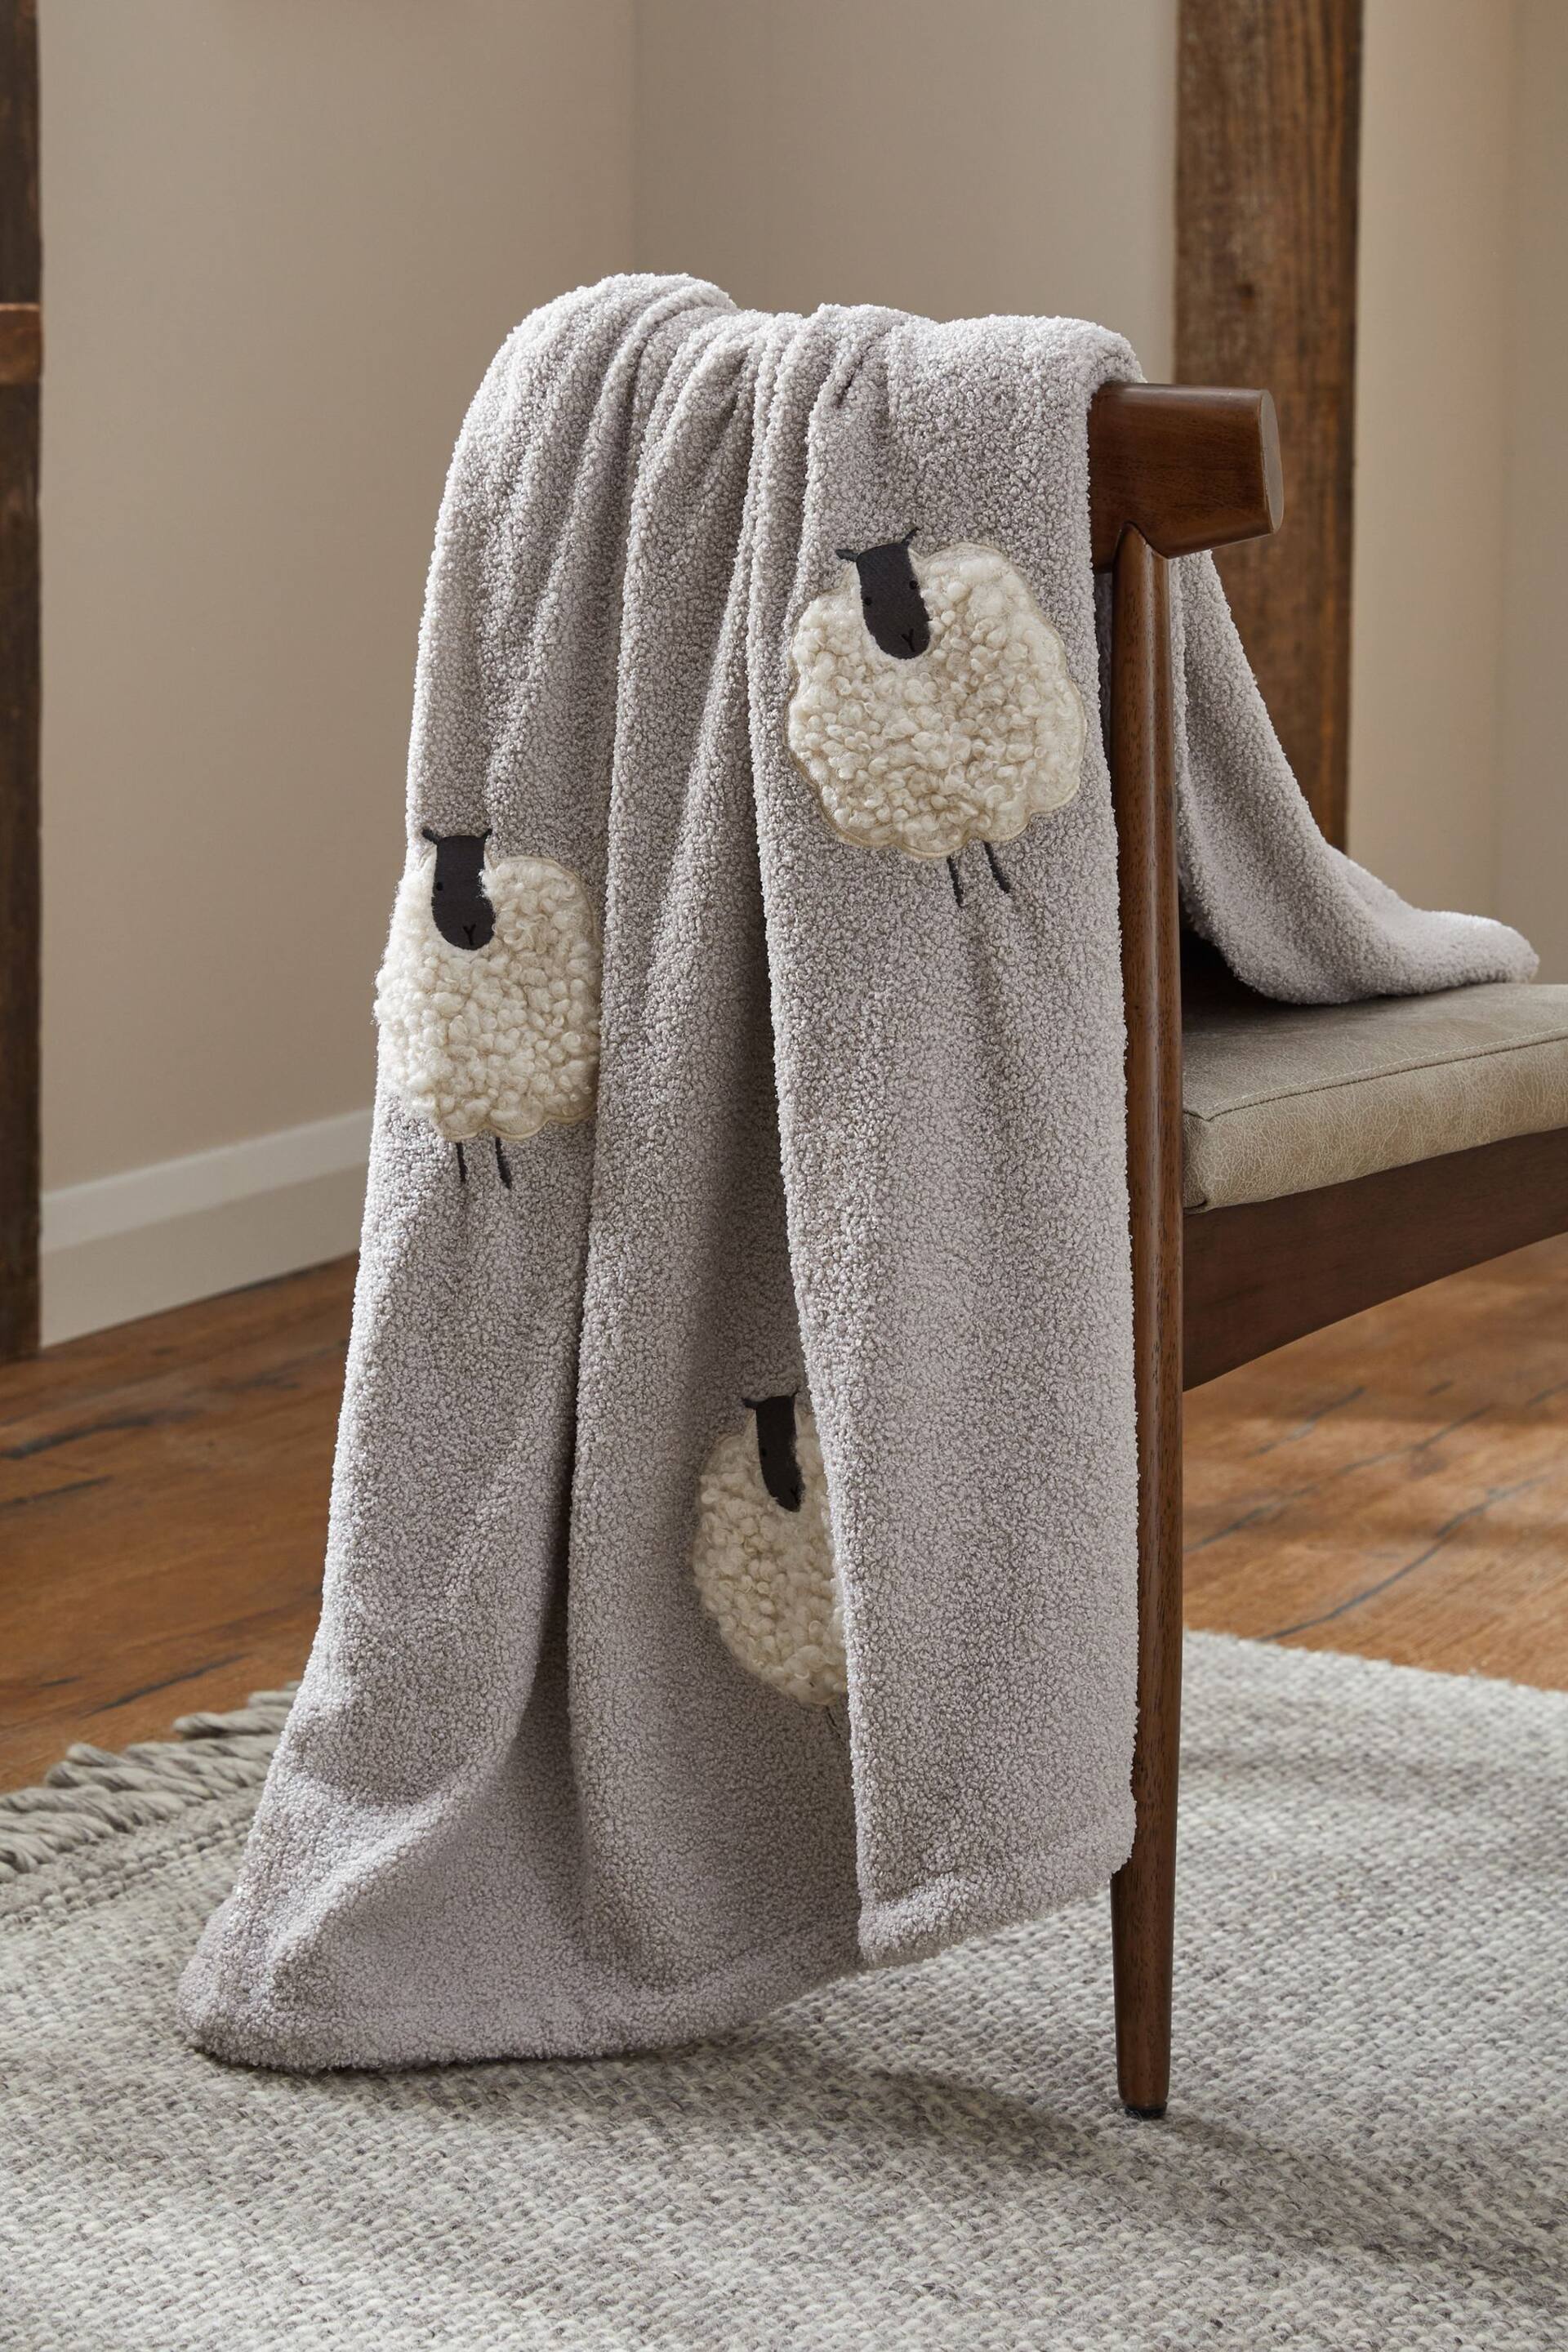 Grey Knitted Sheep Appliqué Throw - Image 3 of 5